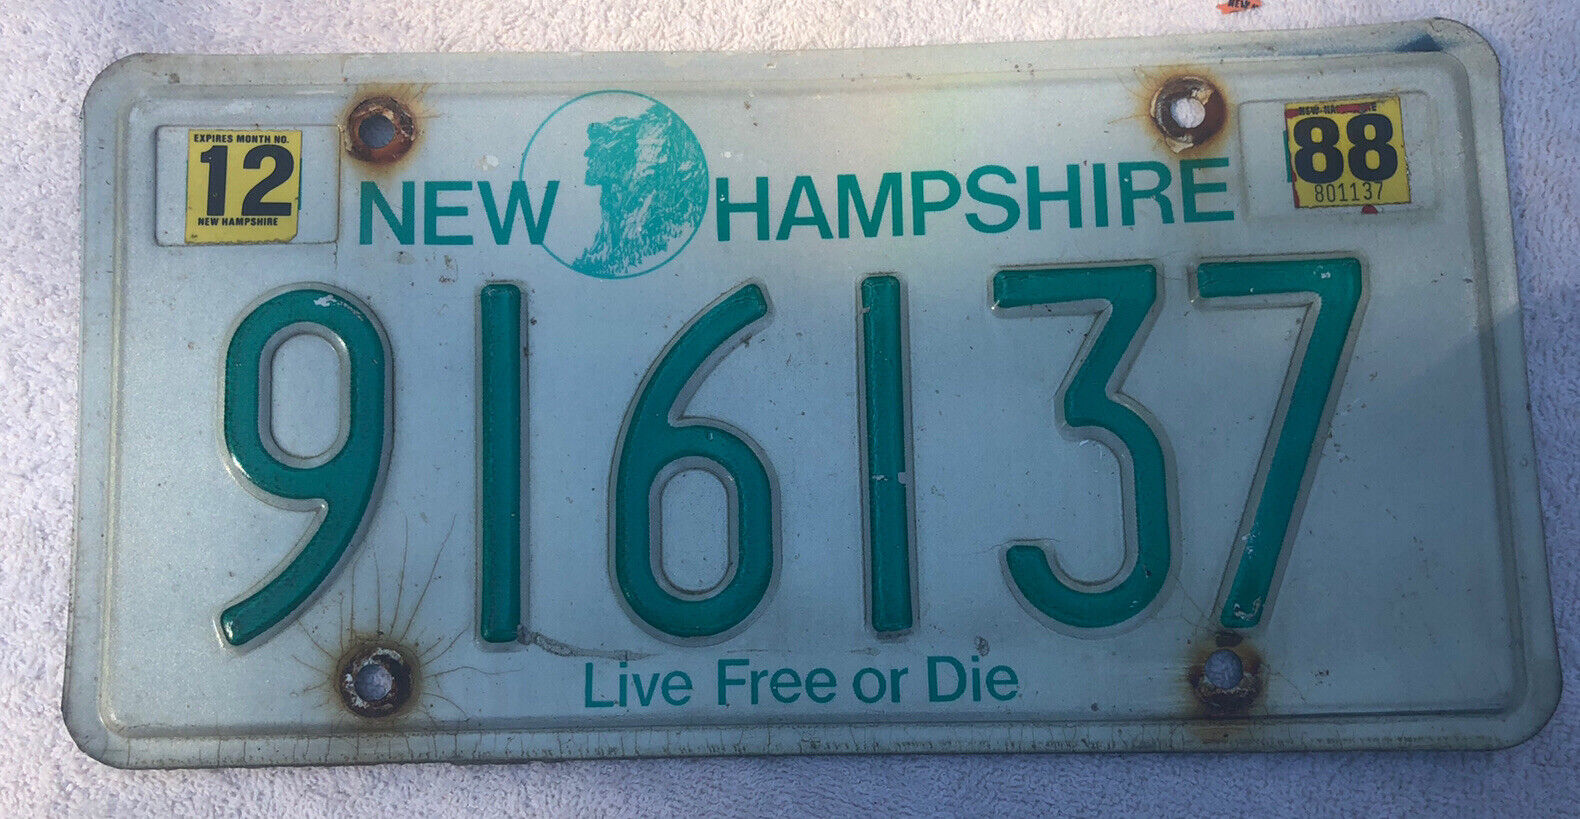 NEW HAMPSHIRE 1988 License Plate LIVE FREE OR DIE # 916137 W/Sticker